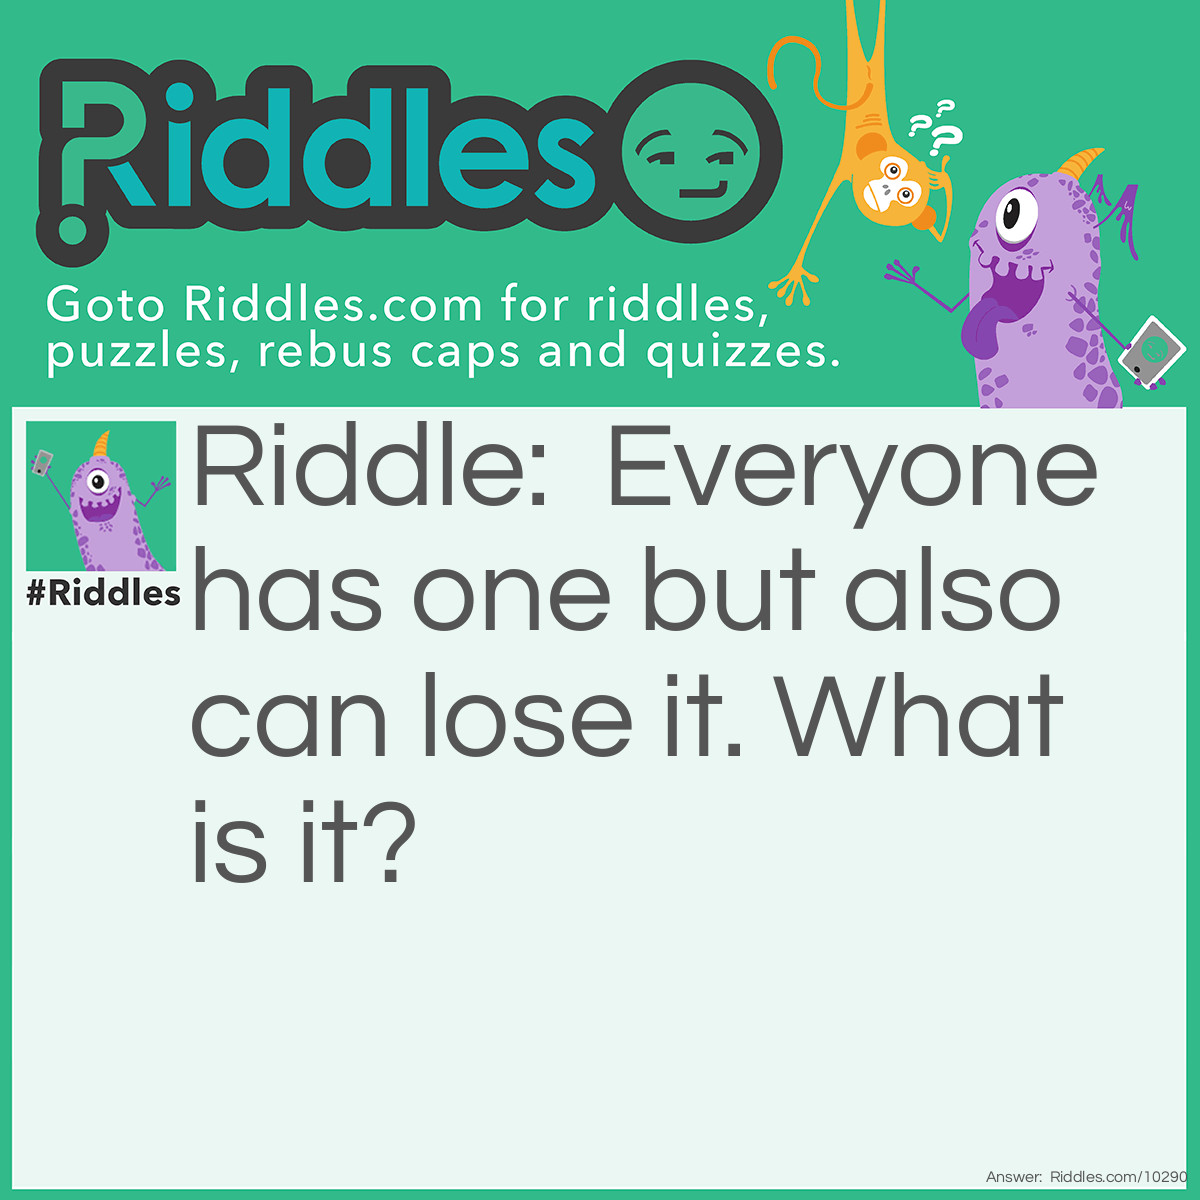 Riddle: Everyone has one but also can lose it. What is it? Answer: Your Mind.